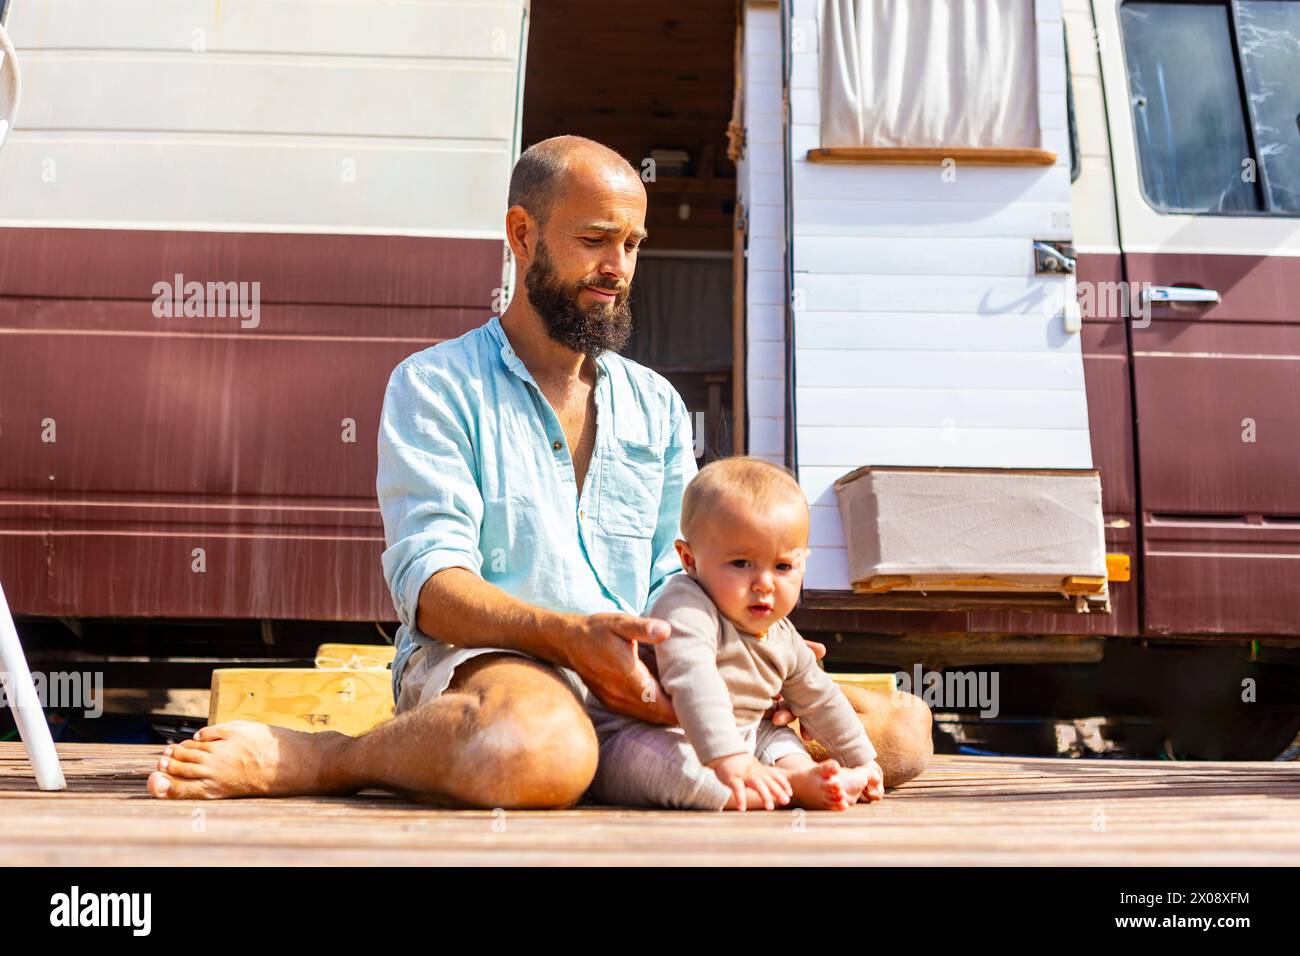 A man and a baby sit on a wooden deck beside their home on wheels, symbolizing sustainable living and family bonding. Stock Photo